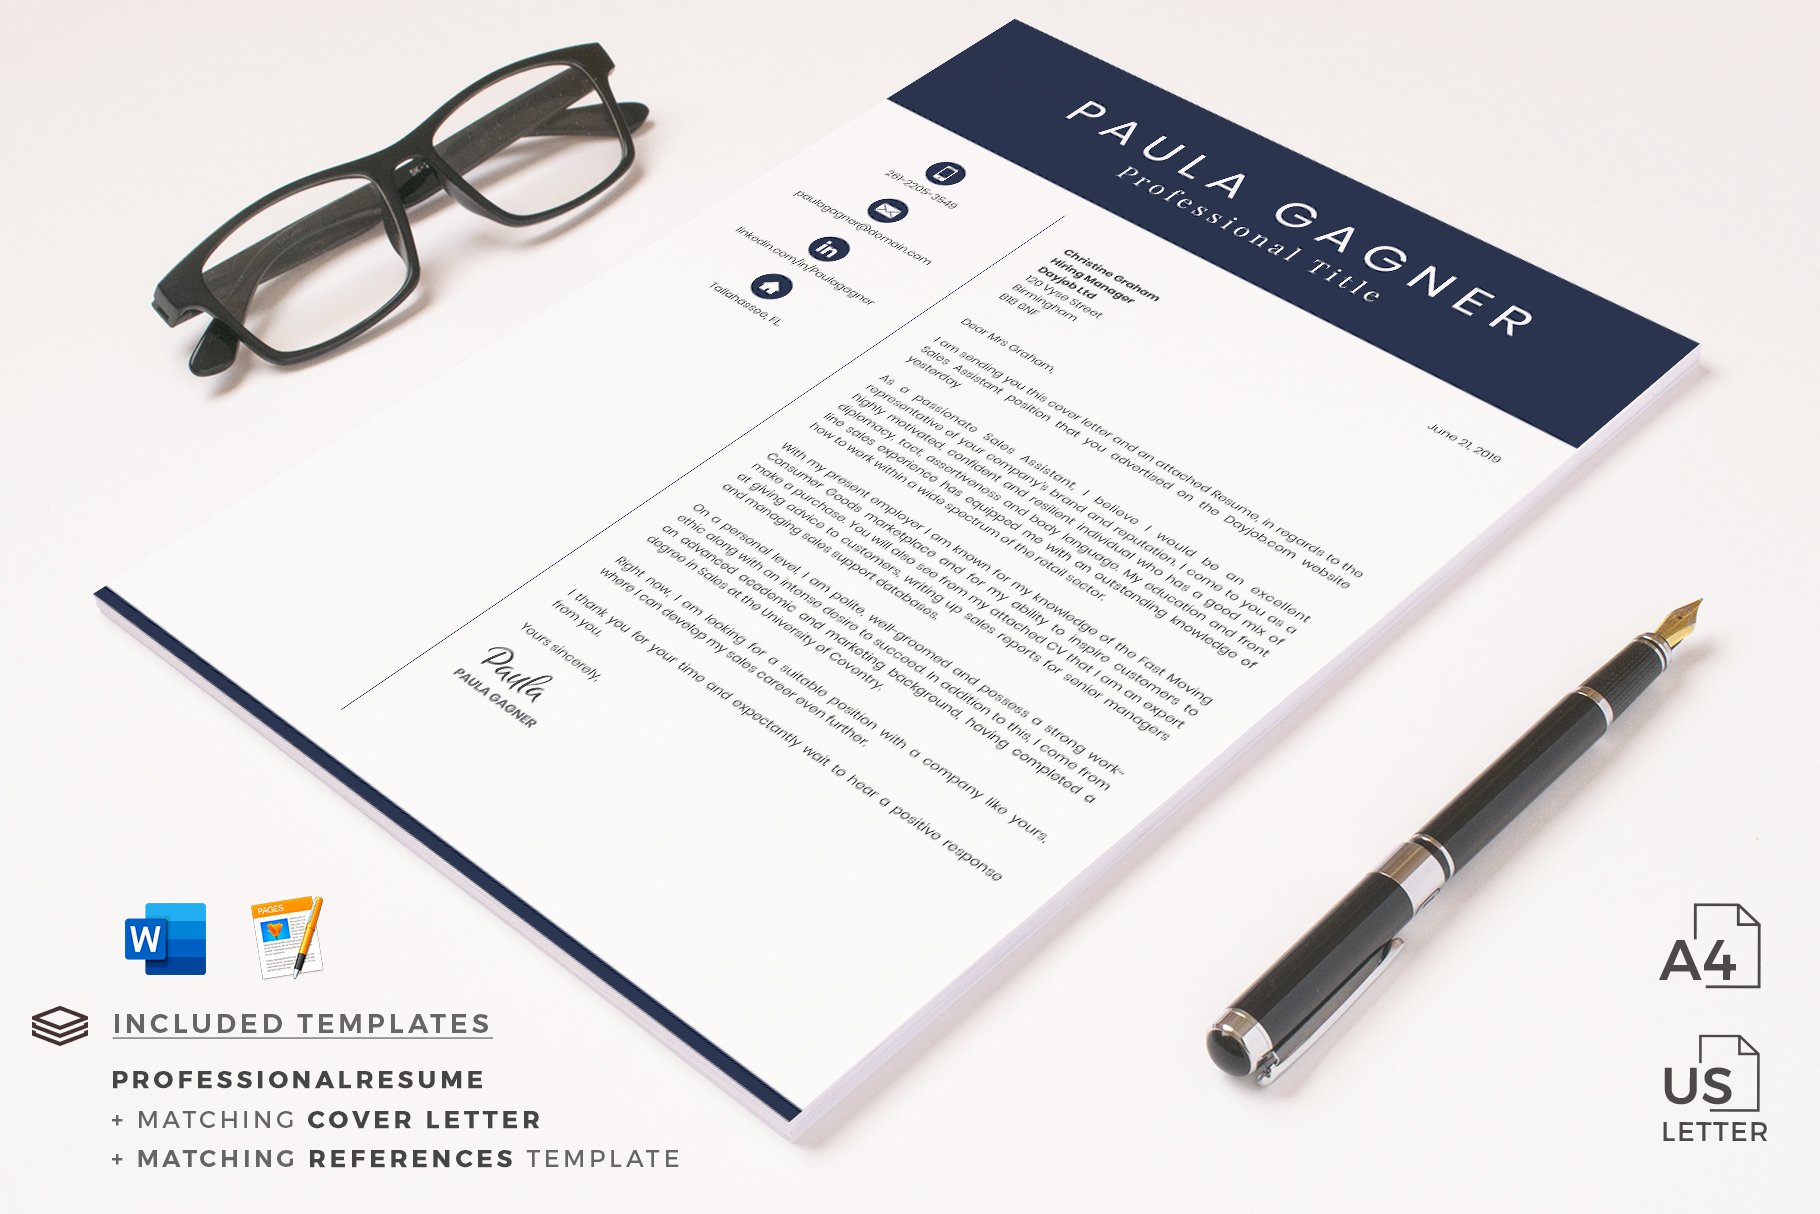 Professional resume template with a pen and glasses.